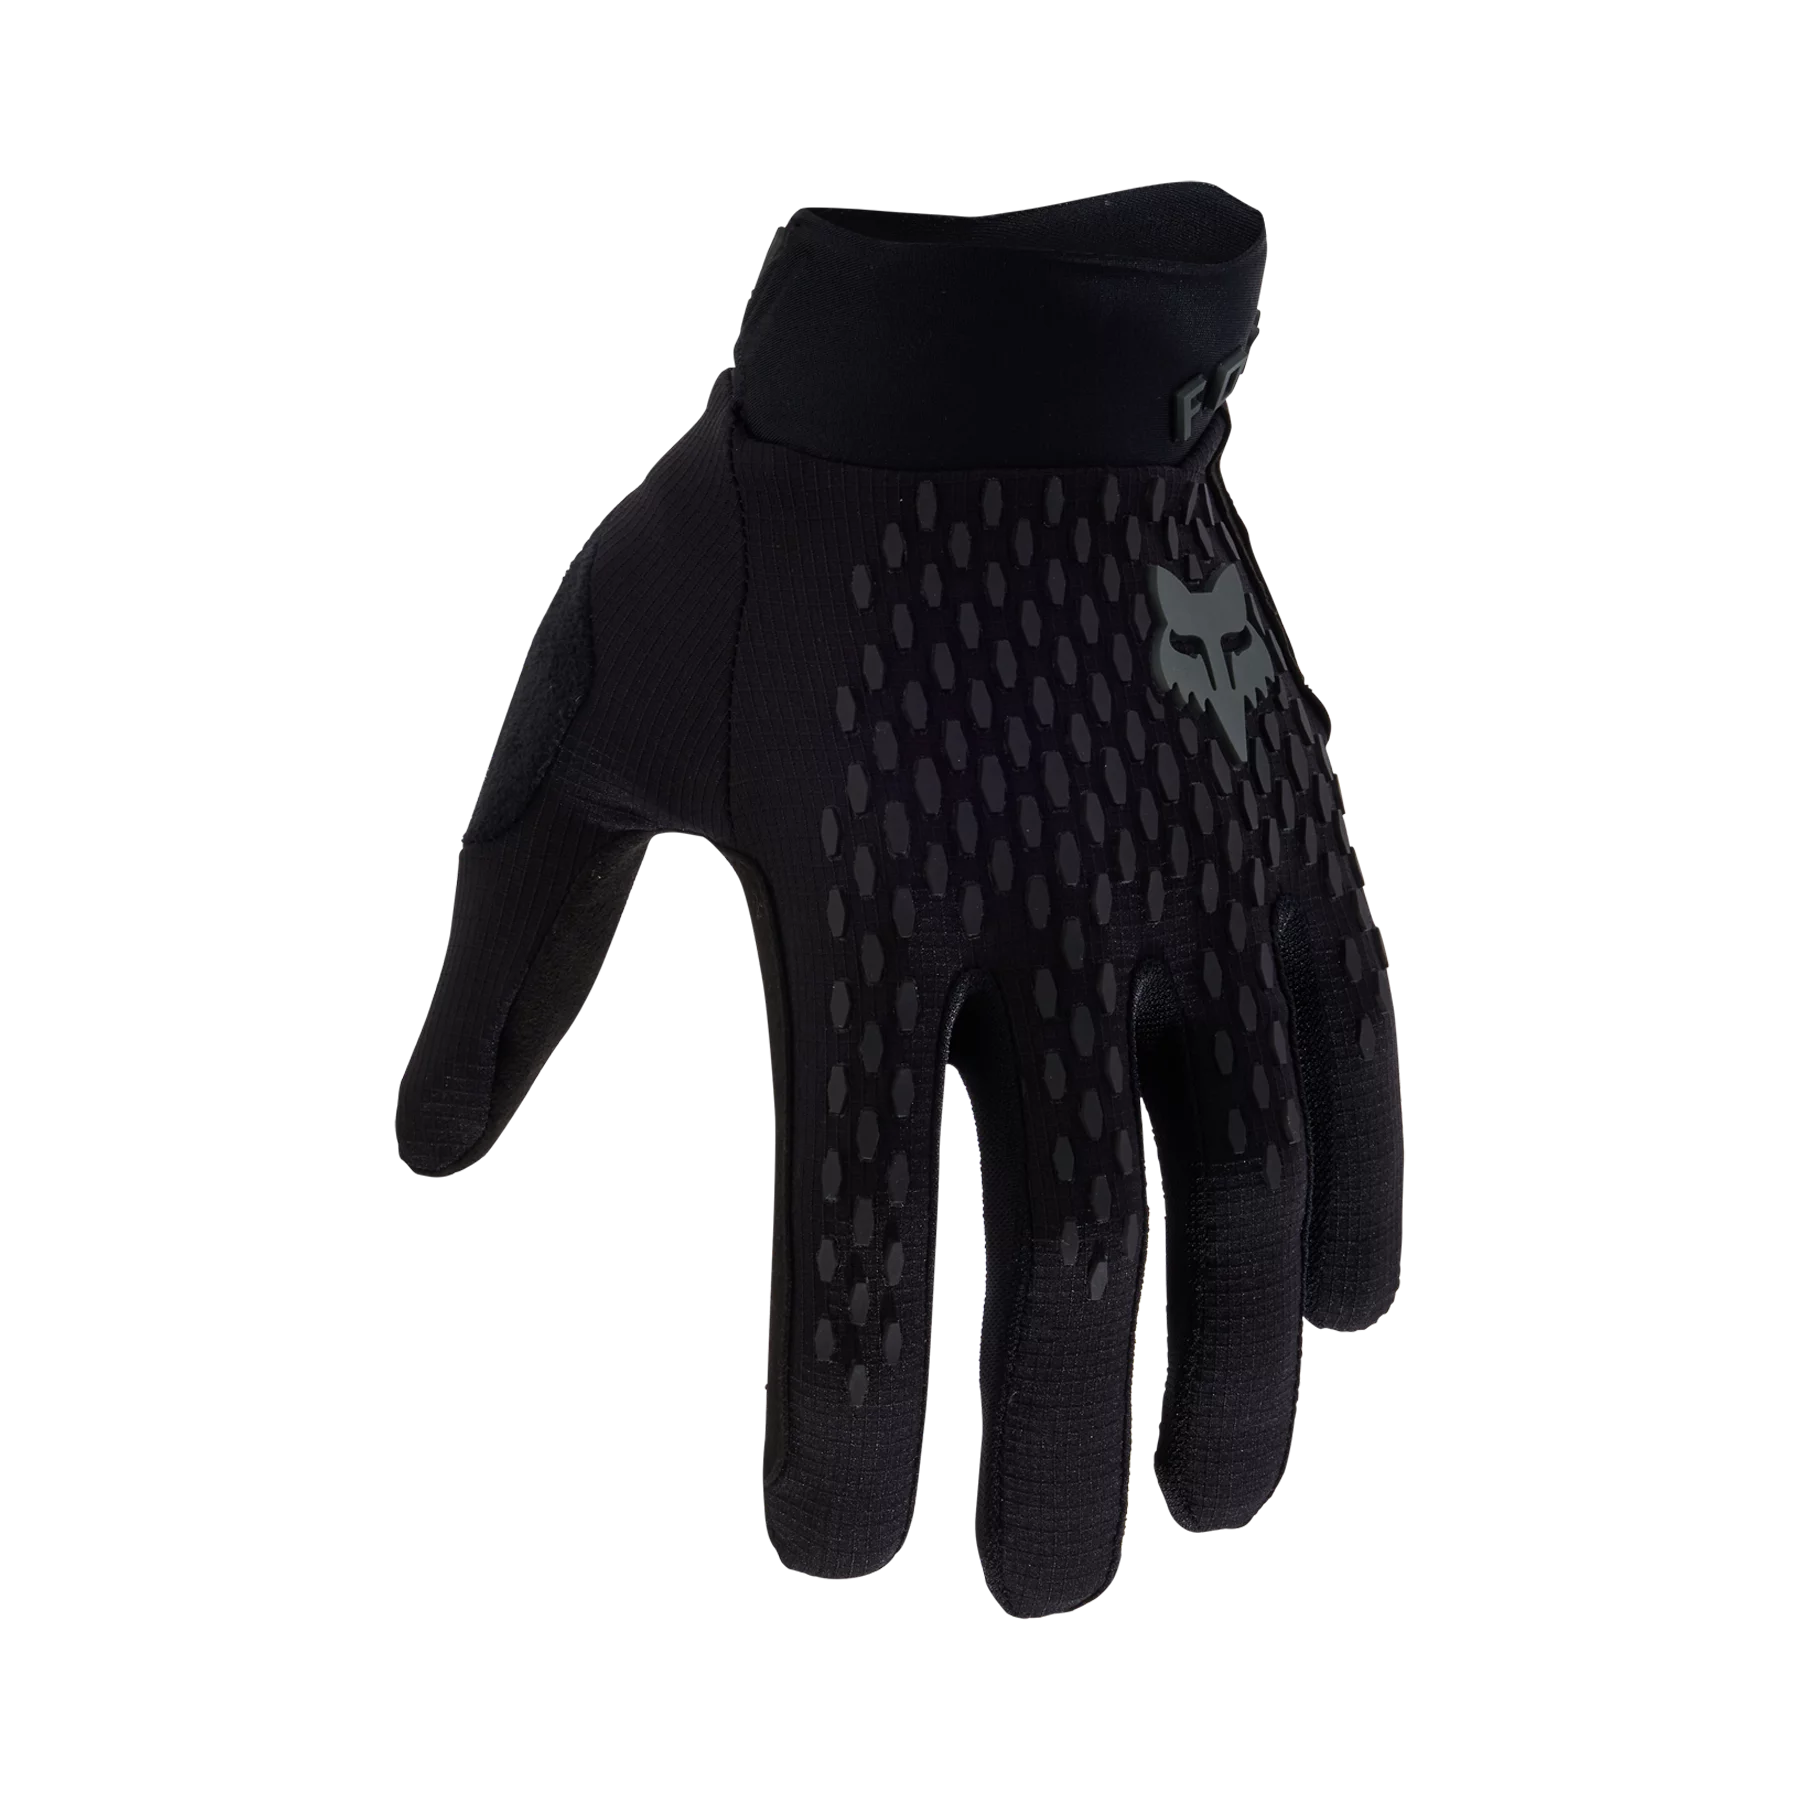 Fox Defend Glove - Gloves - Bicycle Warehouse